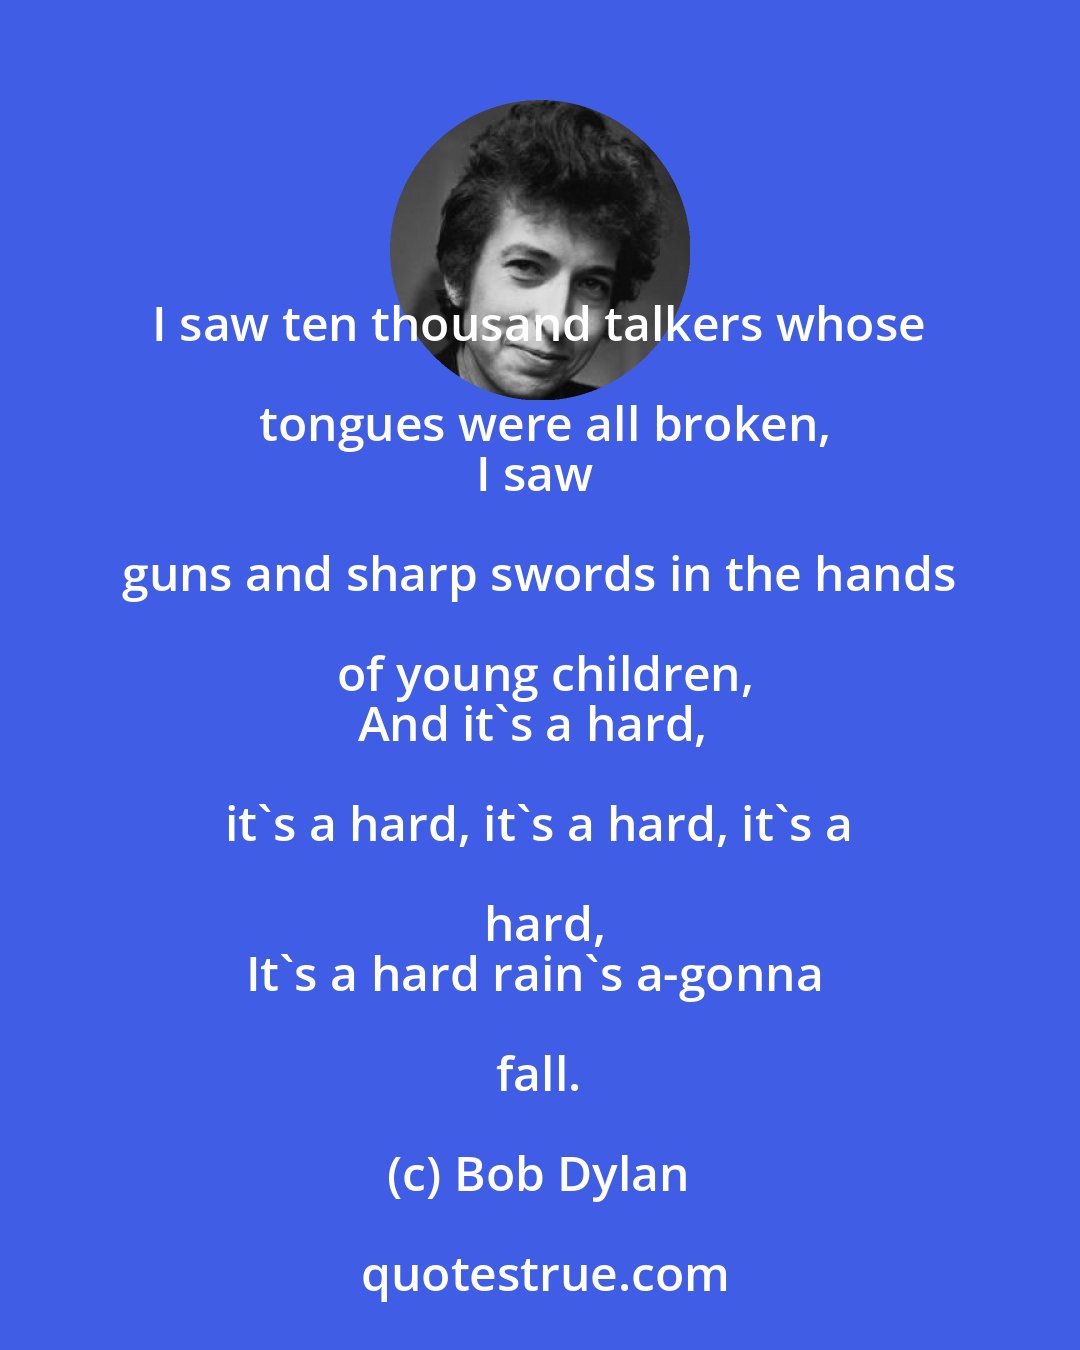 Bob Dylan: I saw ten thousand talkers whose tongues were all broken,
I saw guns and sharp swords in the hands of young children,
And it's a hard, it's a hard, it's a hard, it's a hard,
It's a hard rain's a-gonna fall.